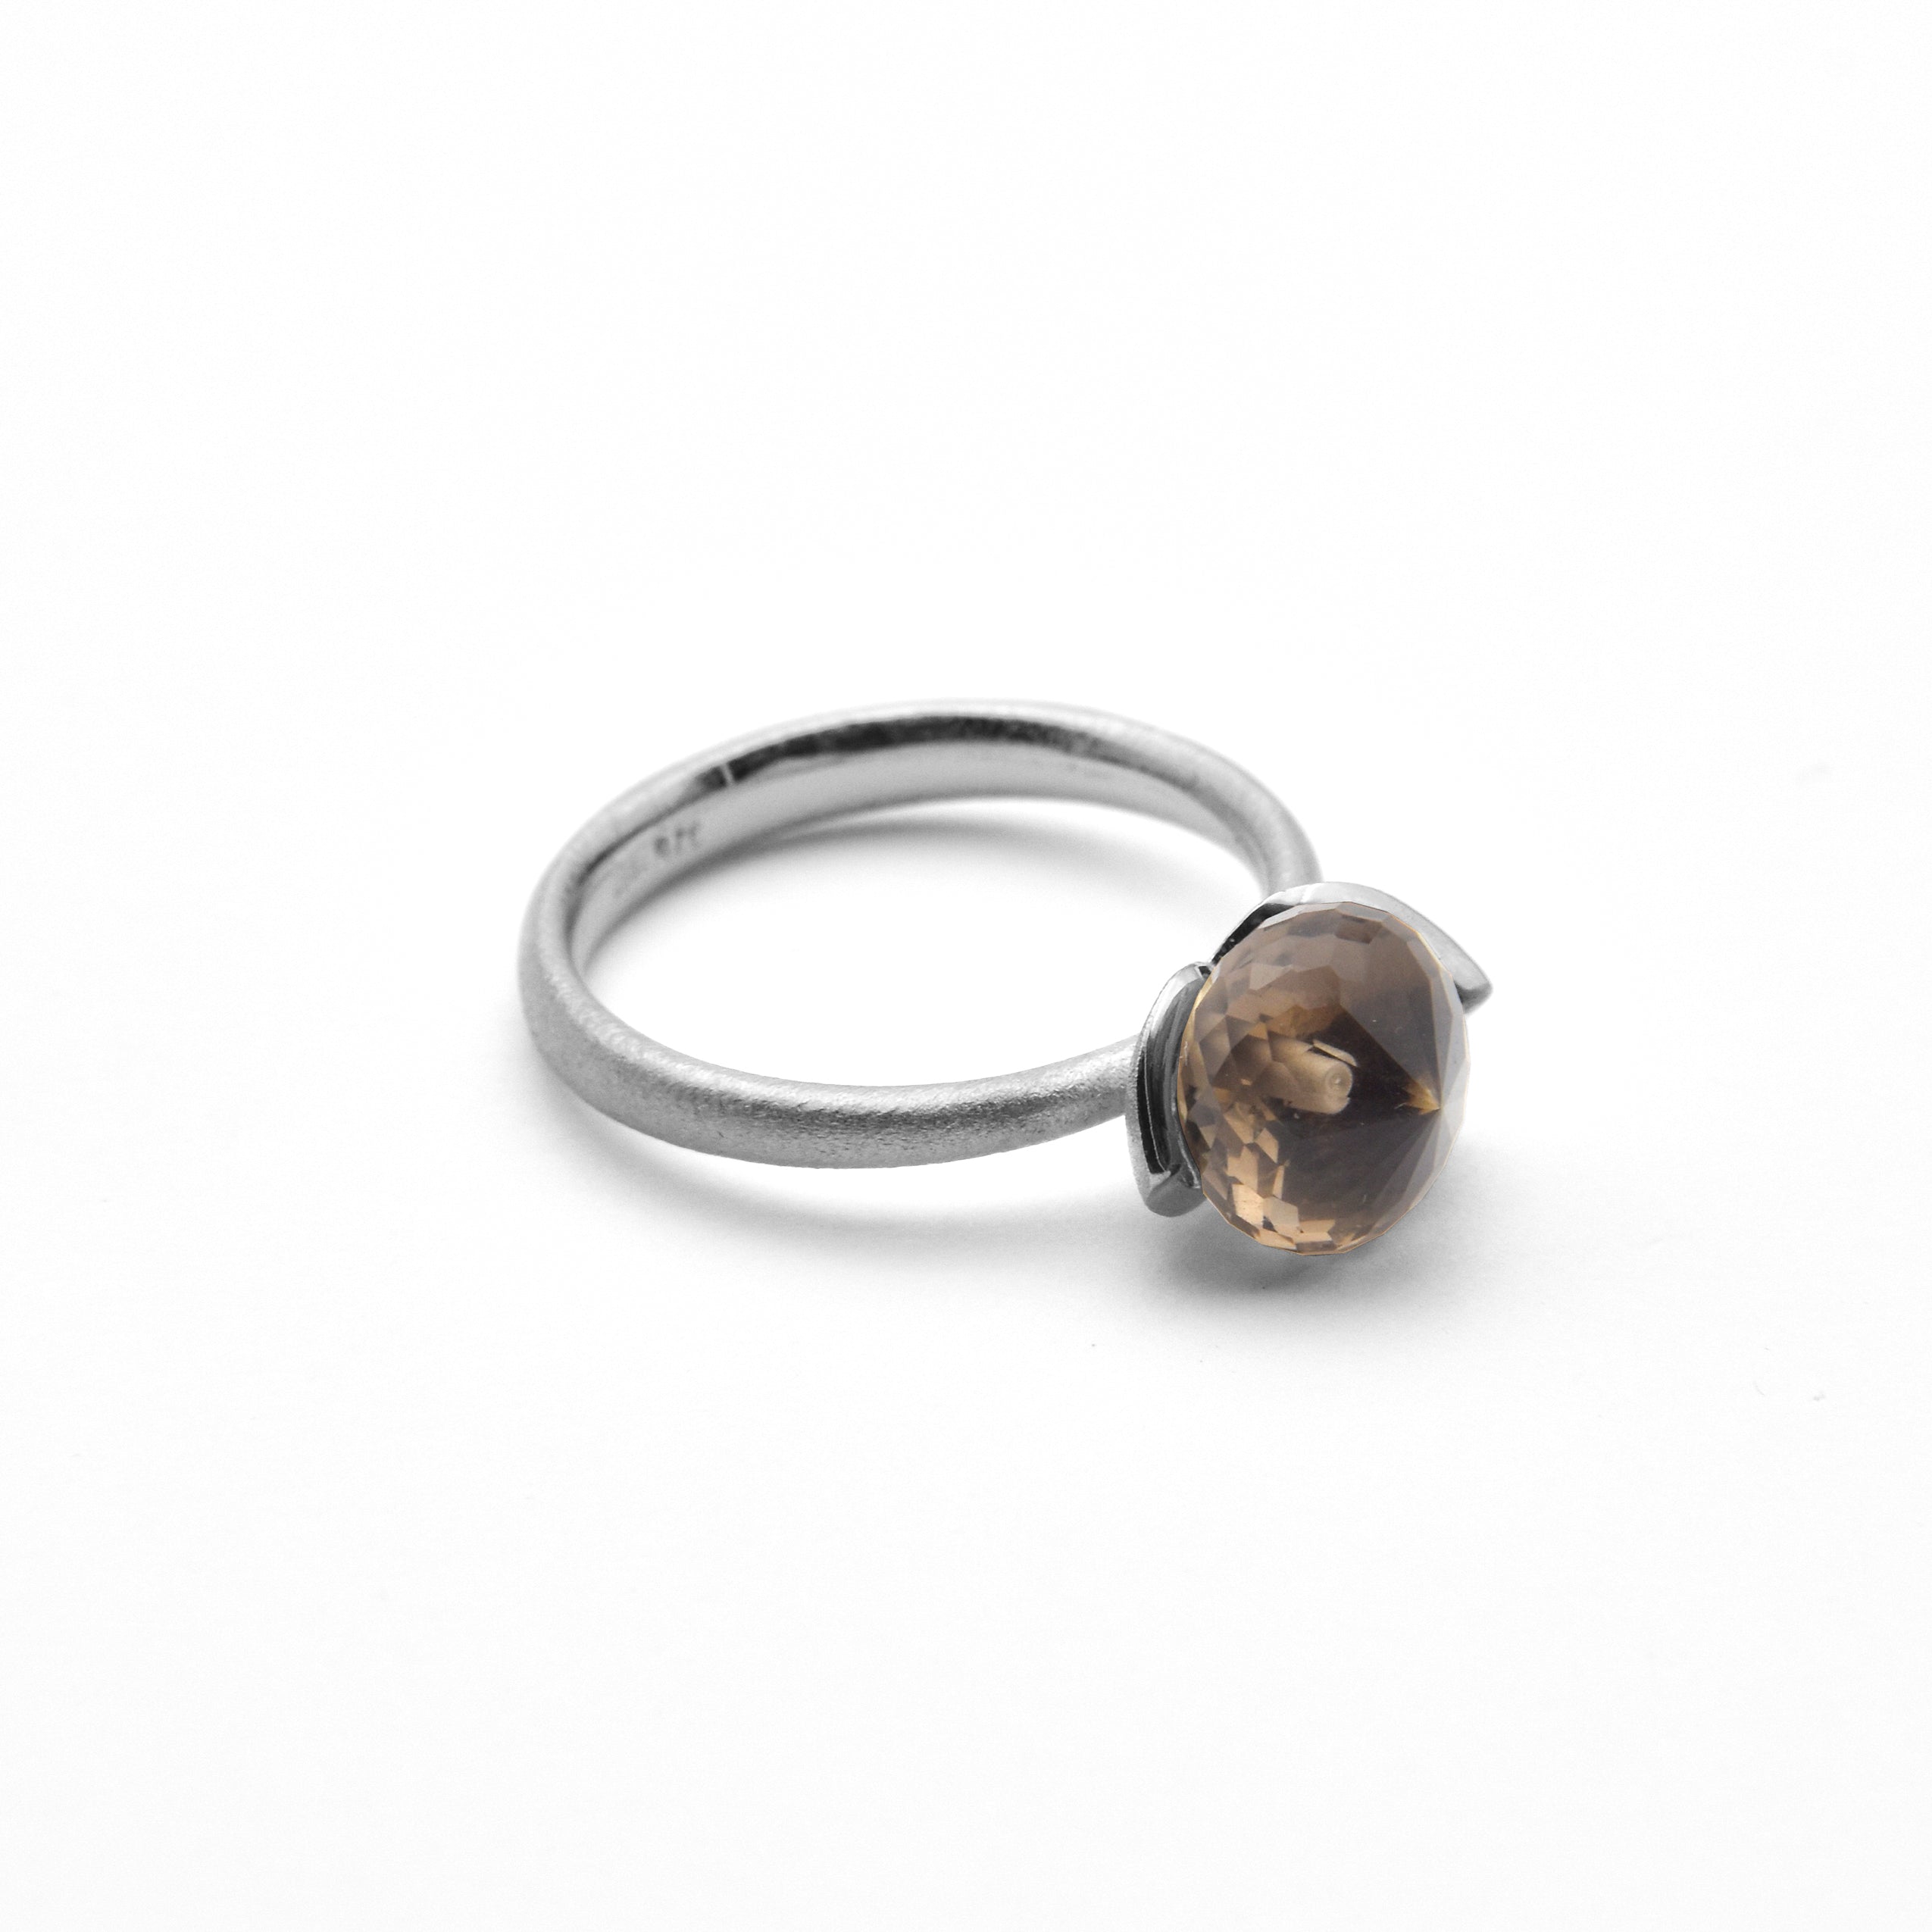 Dolce ring "smal" with smoky quartz 925/-